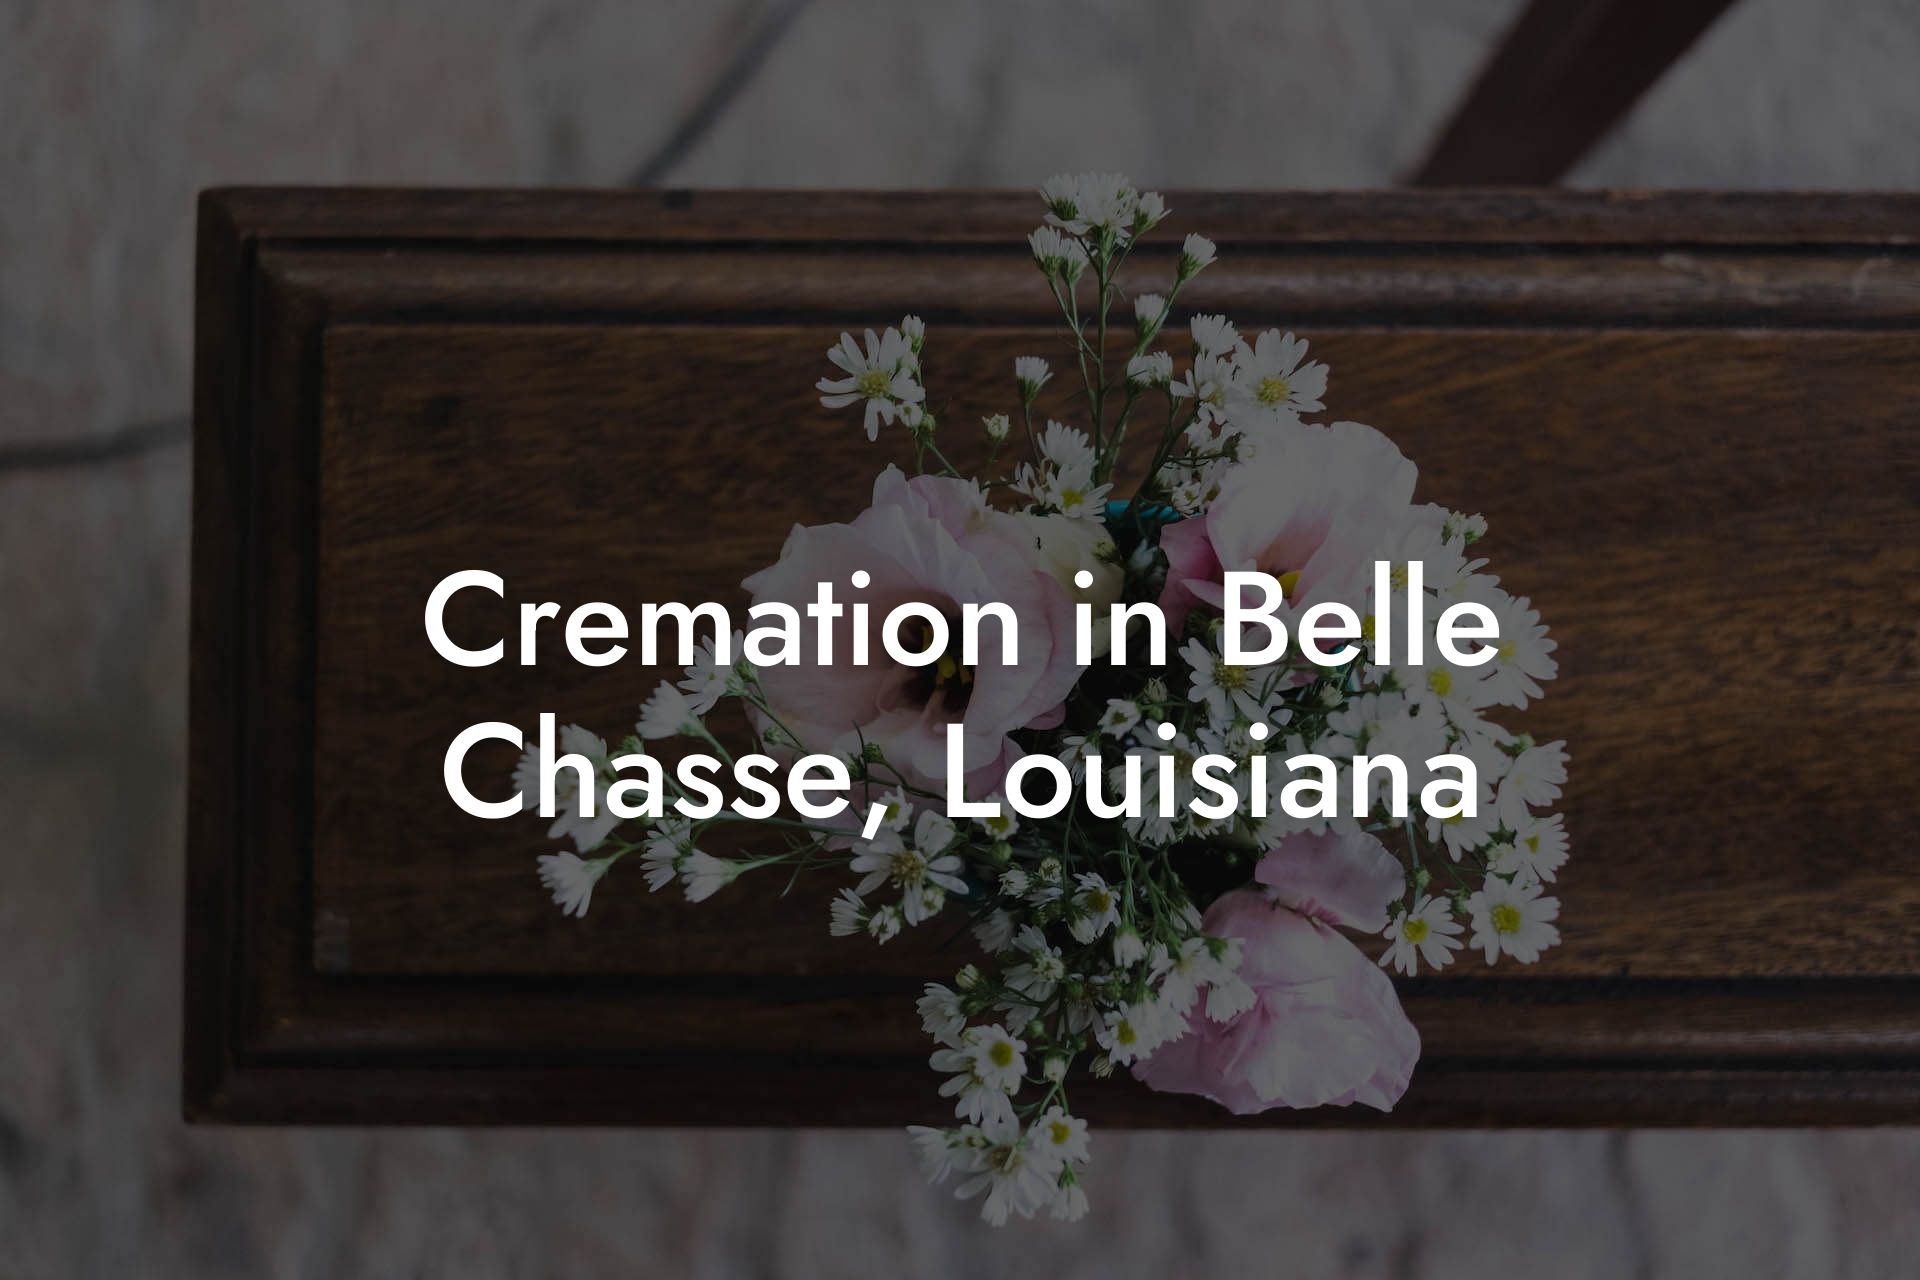 Cremation in Belle Chasse, Louisiana